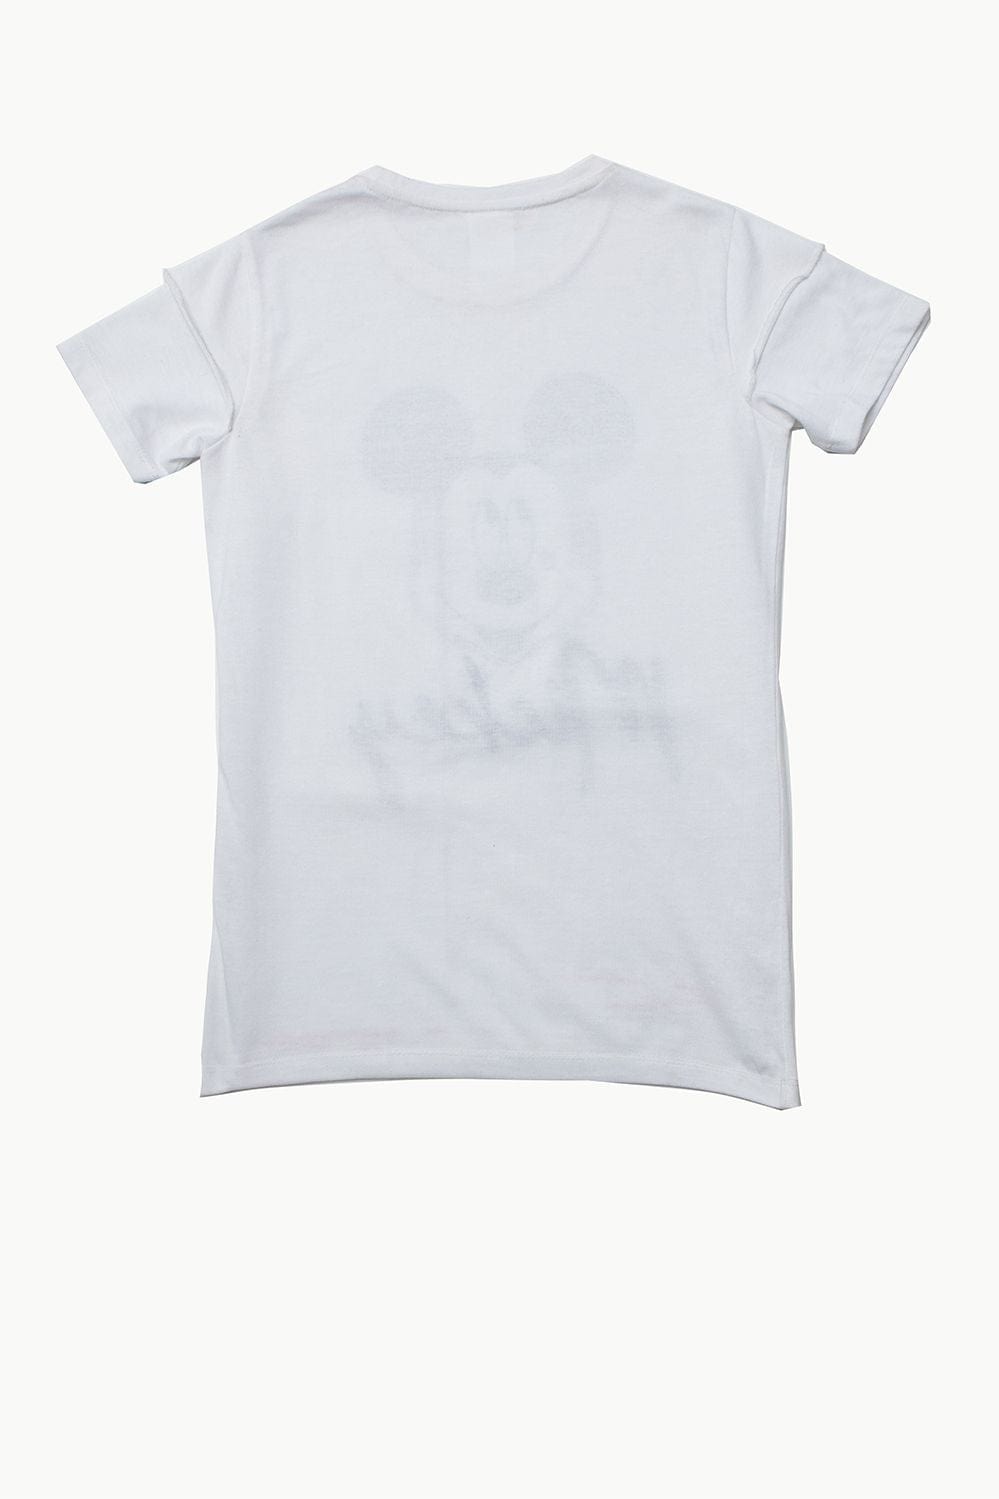 Hope Not Out by Shahid Afridi Women T-Shirt Mickey Graphic Tee